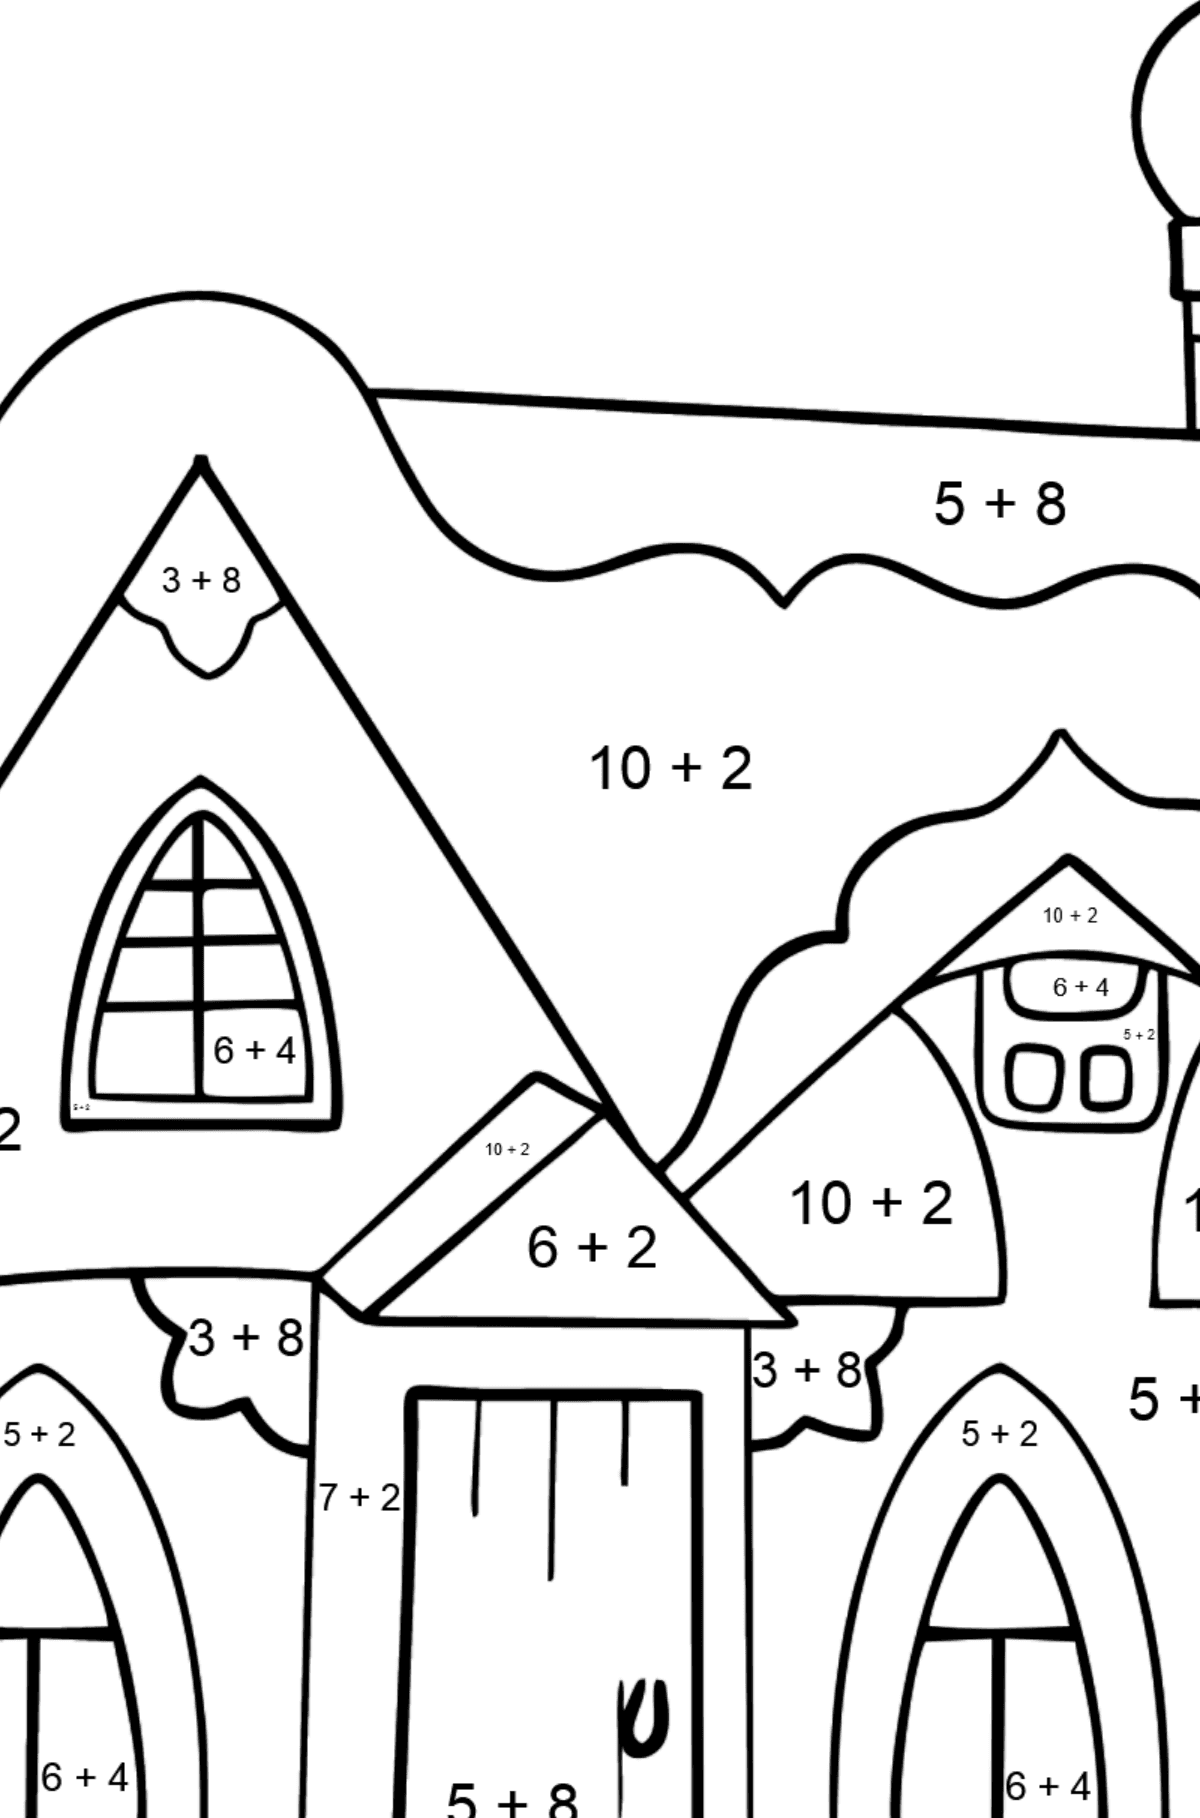 Coloring Page - A Fairytale House - Math Coloring - Addition for Kids